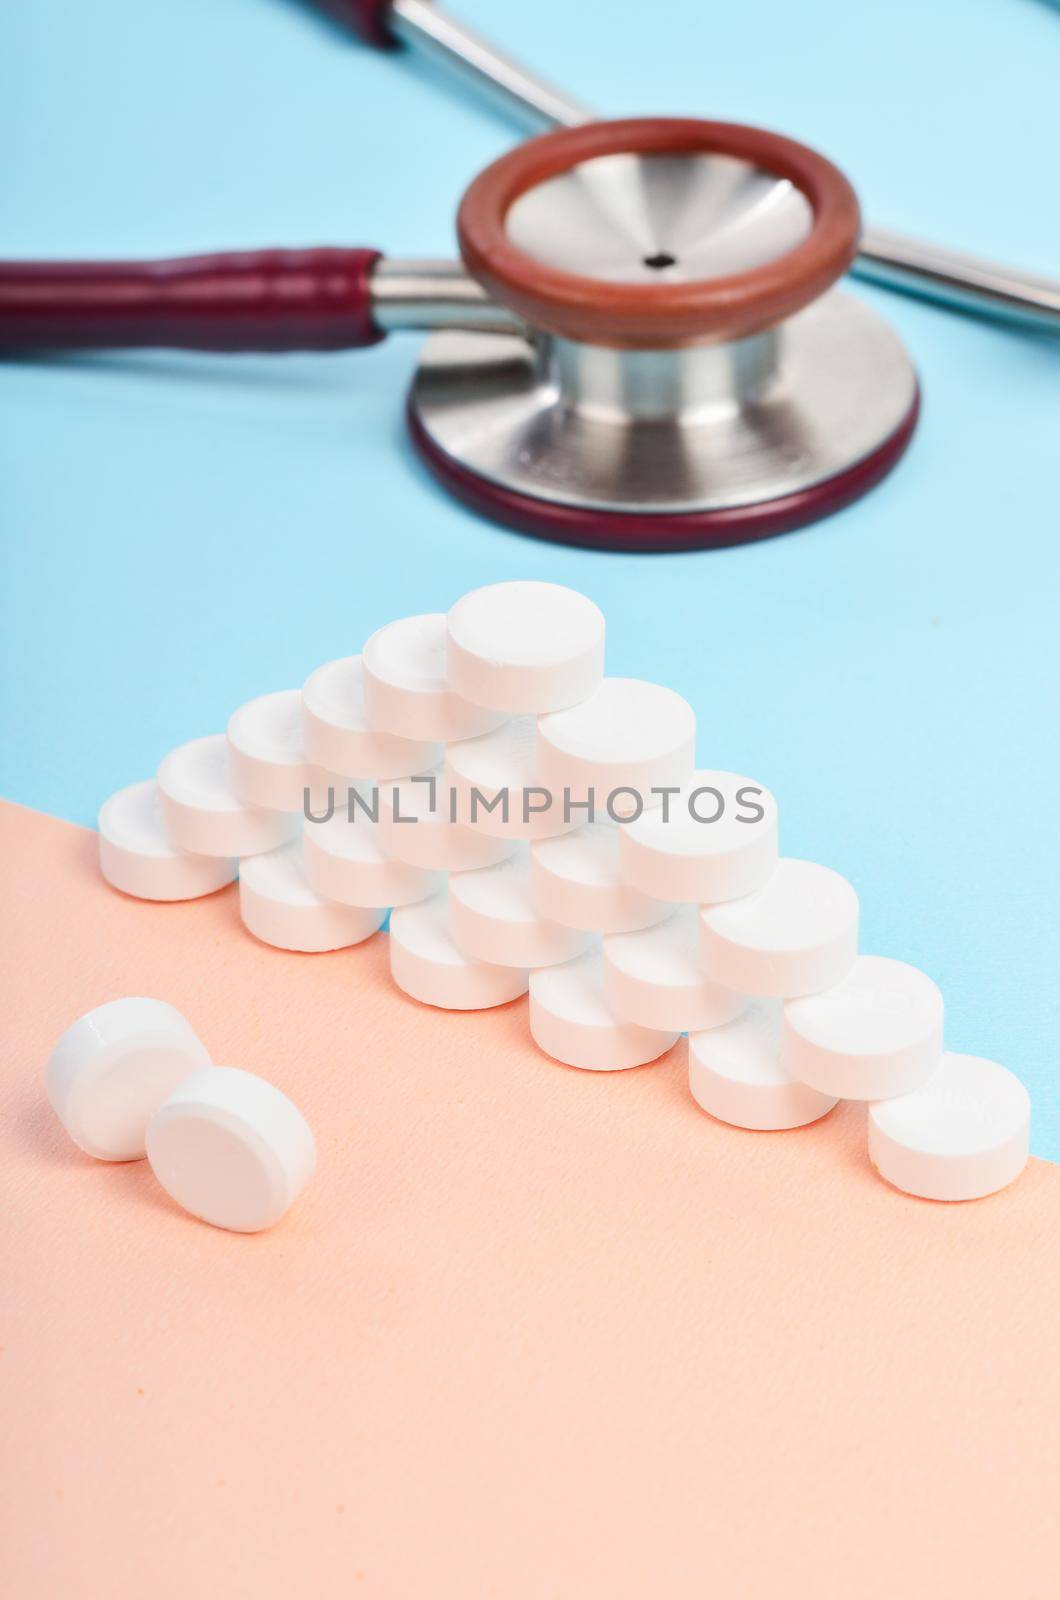 White tablet medicine with medicine stethoscope on blue background. by Gamjai